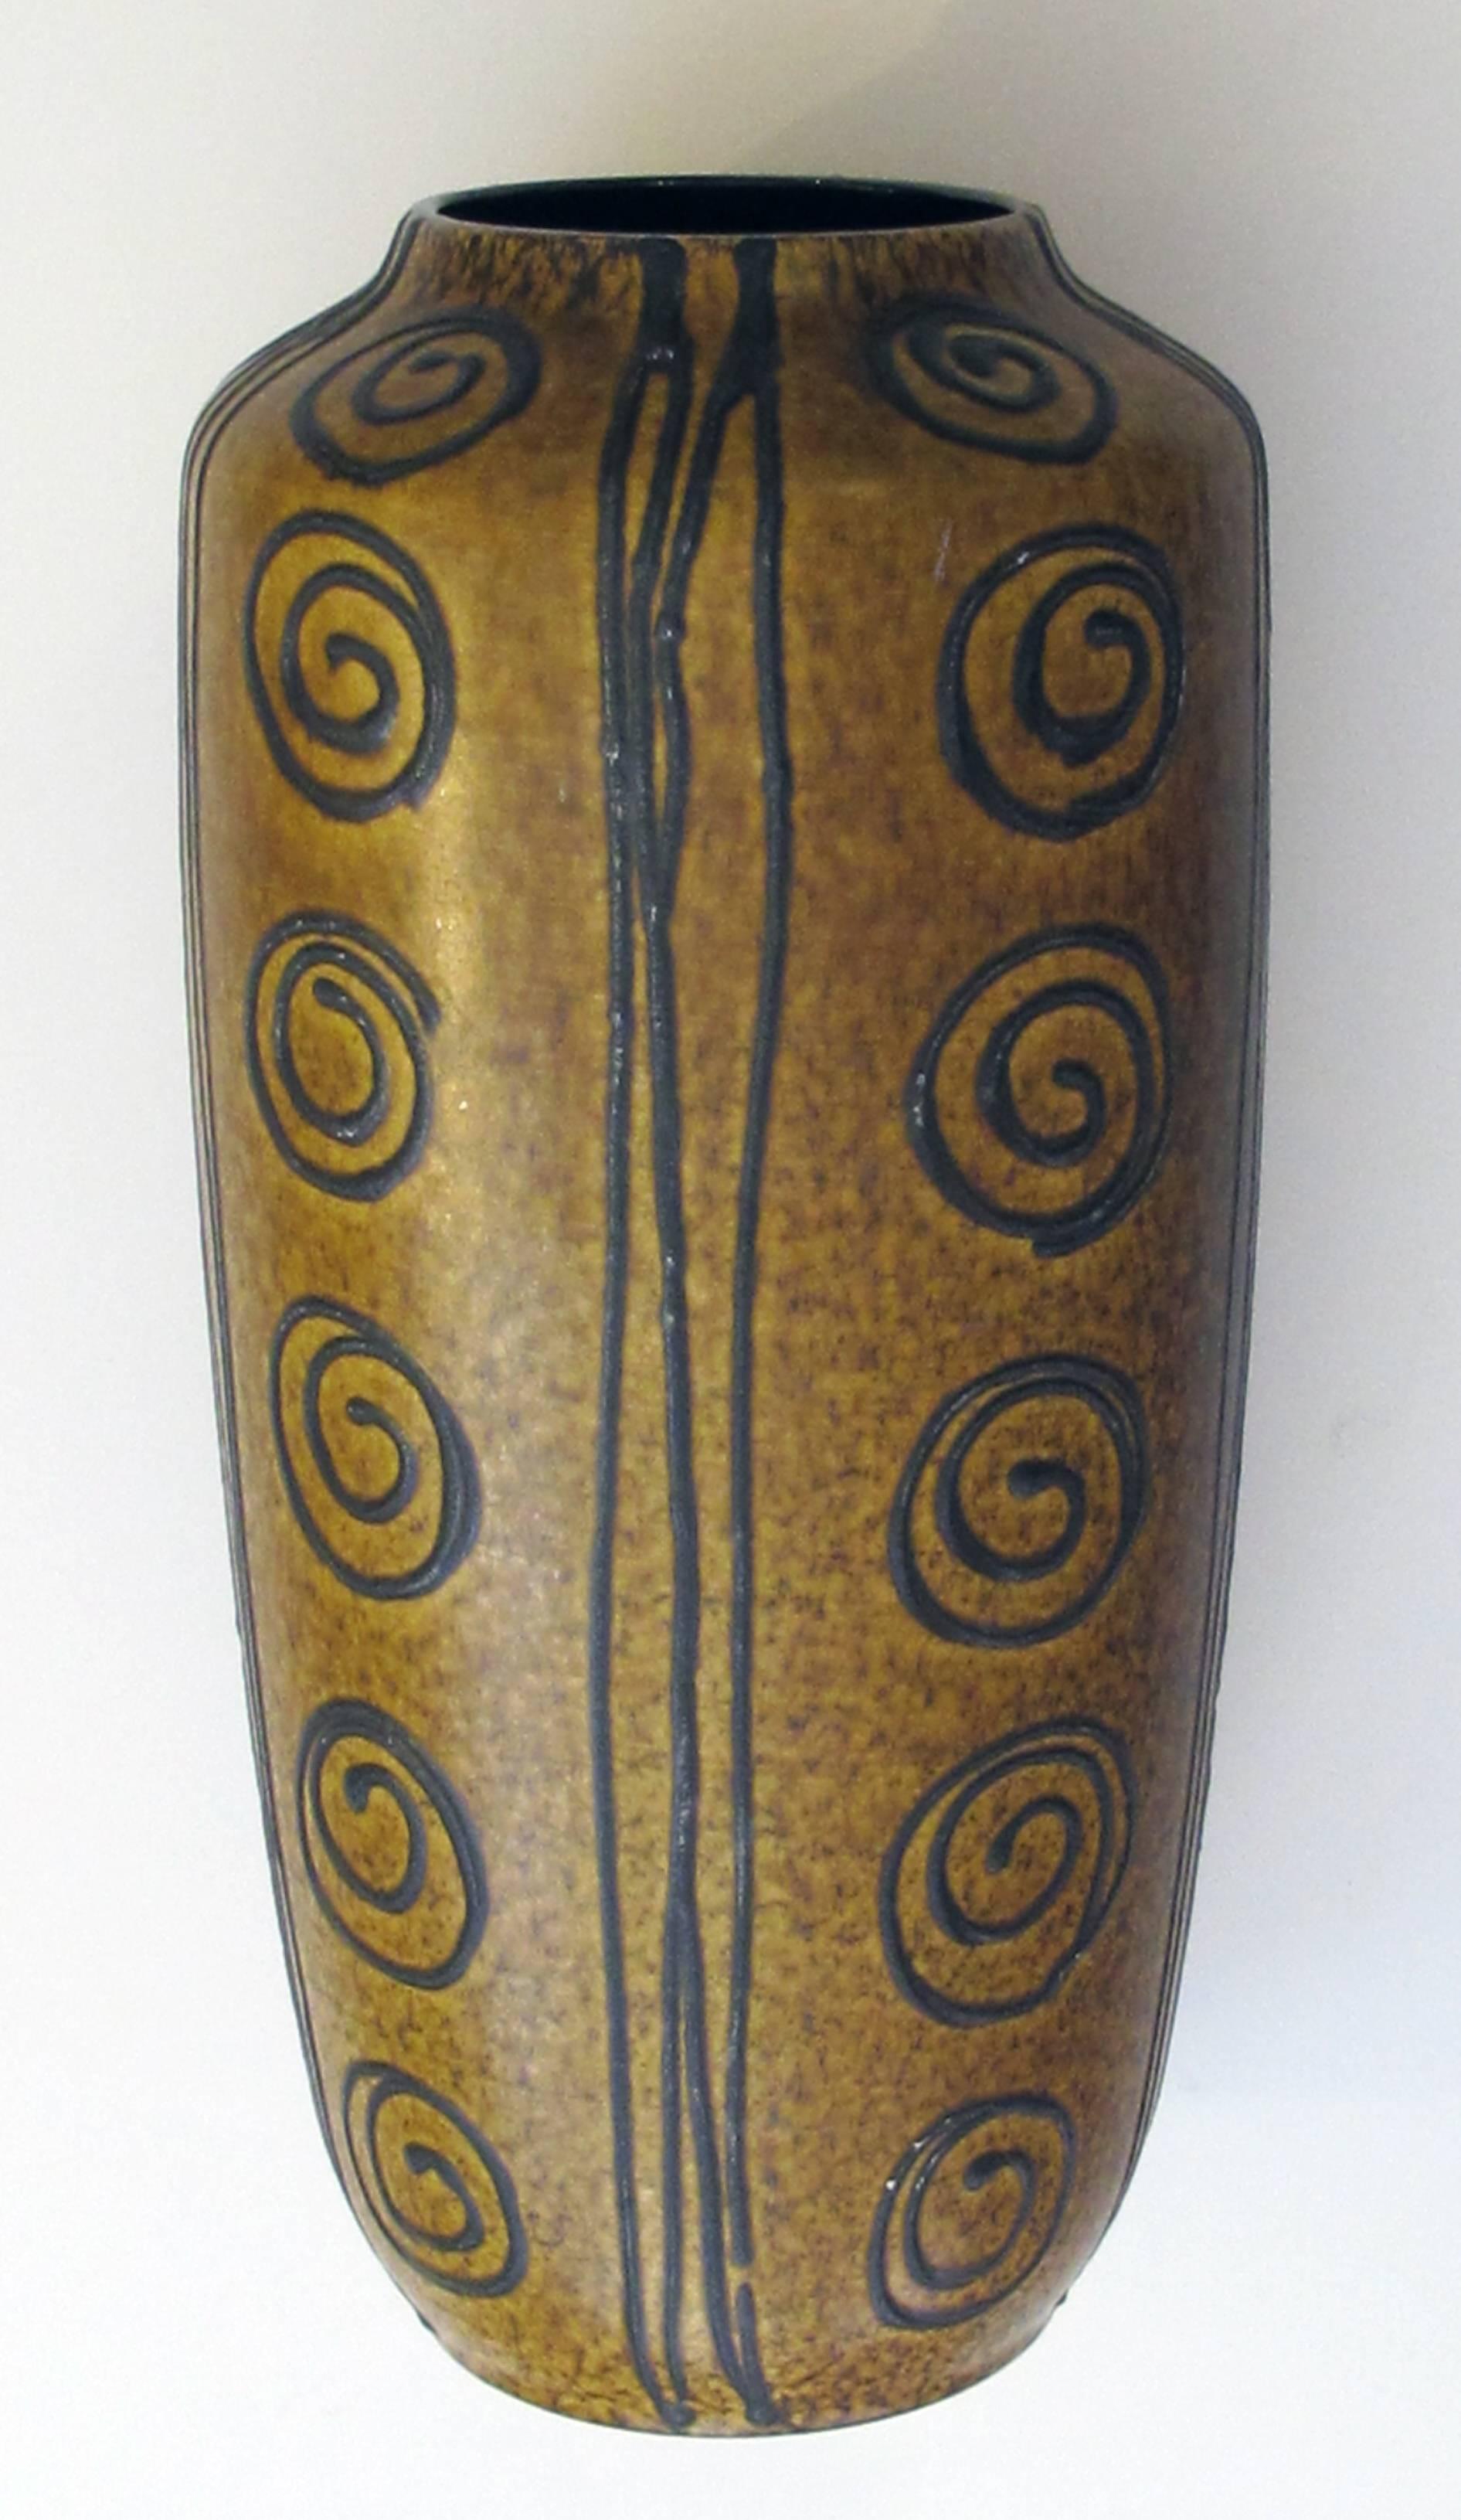 A tall and striking West German, 1960s ochre glazed vase with dark brown drip-glaze decoration; the tall tapering vase with everted mouth; adorned overall with dark brown drips and coiled spheres on an ochre ground; with maker's mark on underside.